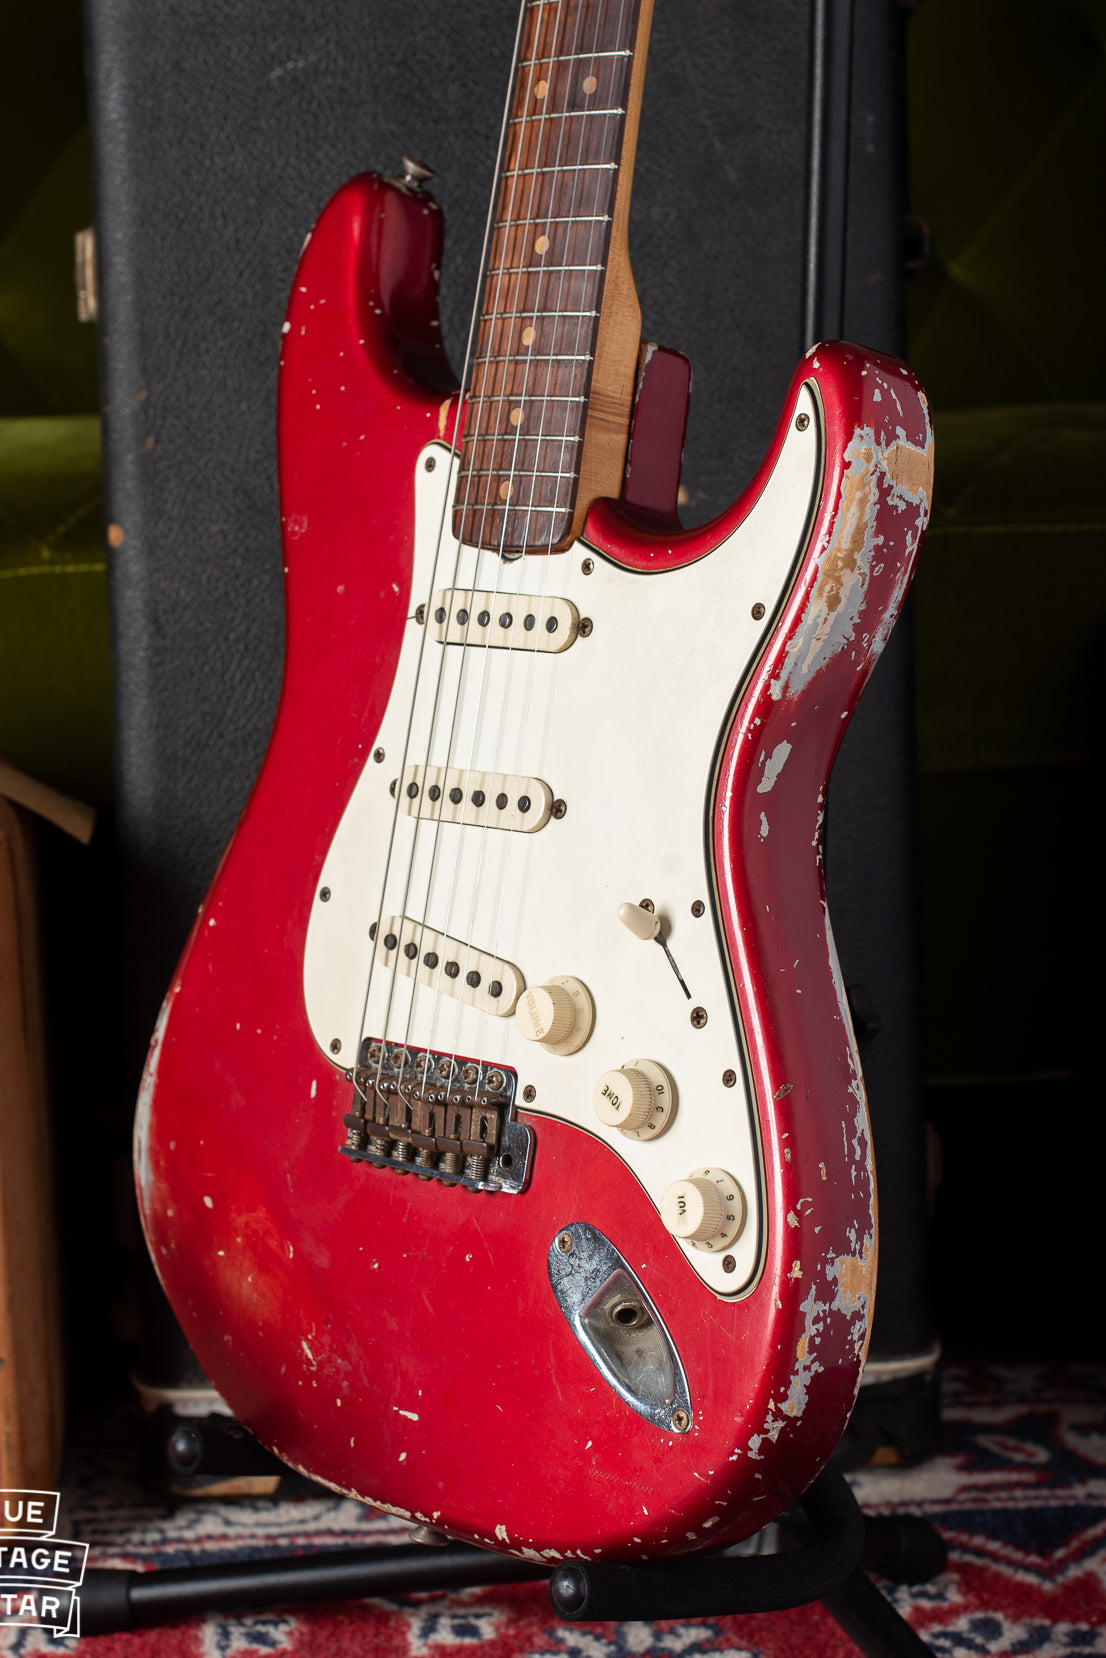 Side view showing wear on Fender Stratocaster 1964 Candy Apple Red